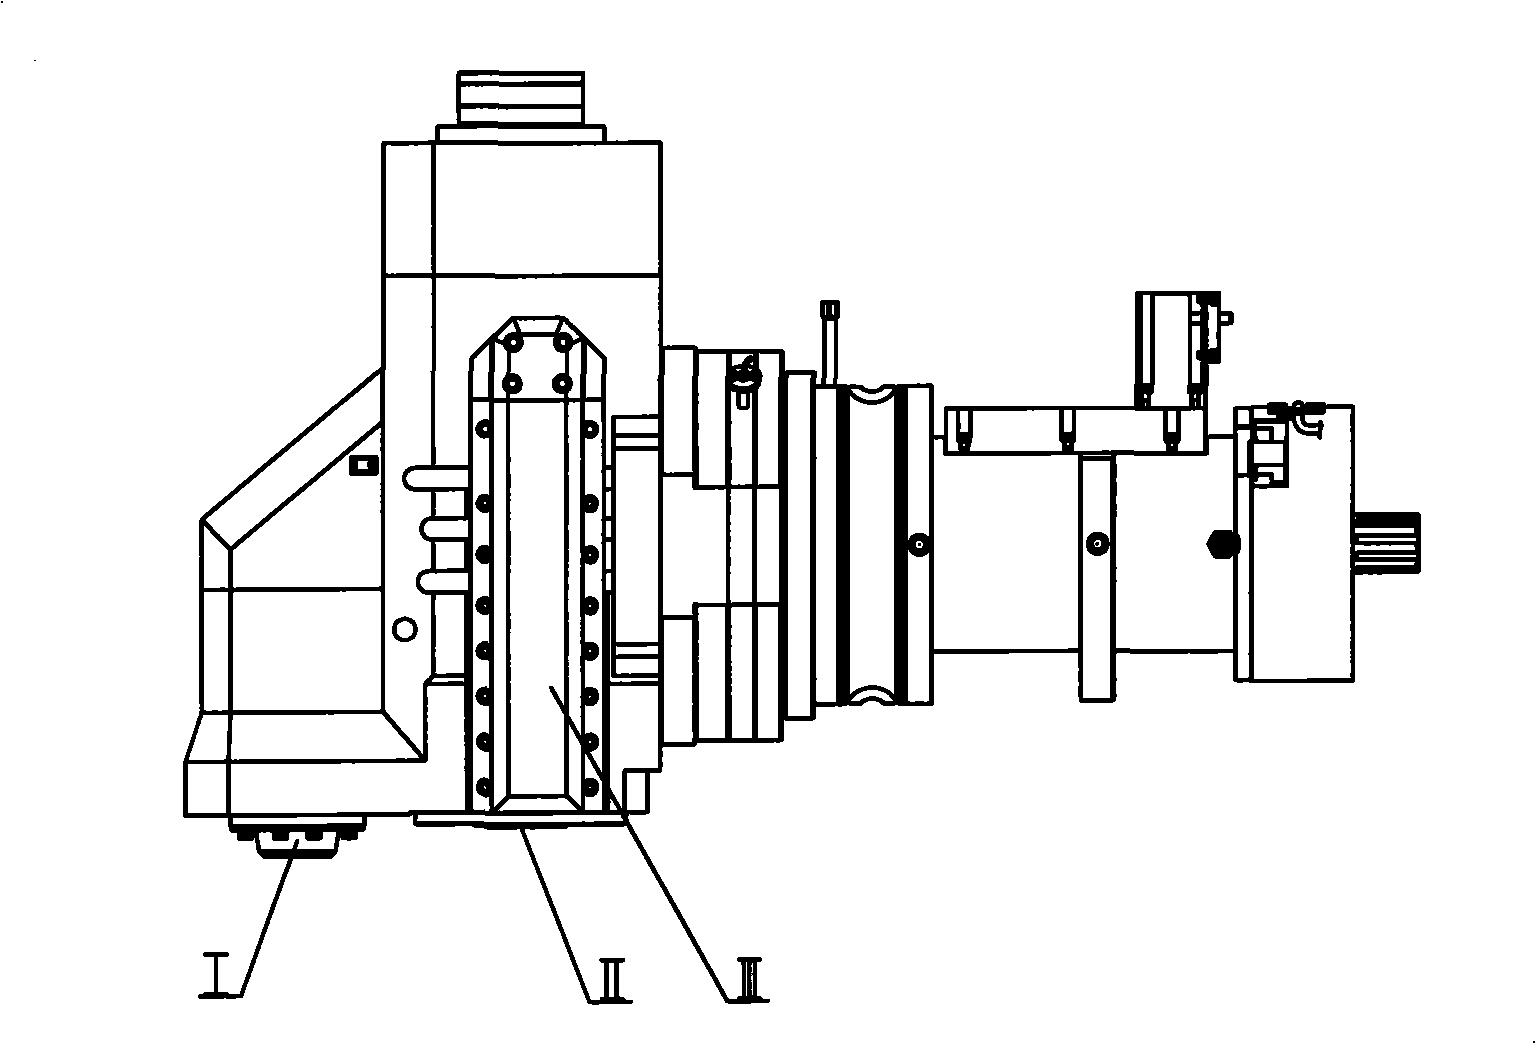 B-axis cutter holder device of a turn-milling complex machining center